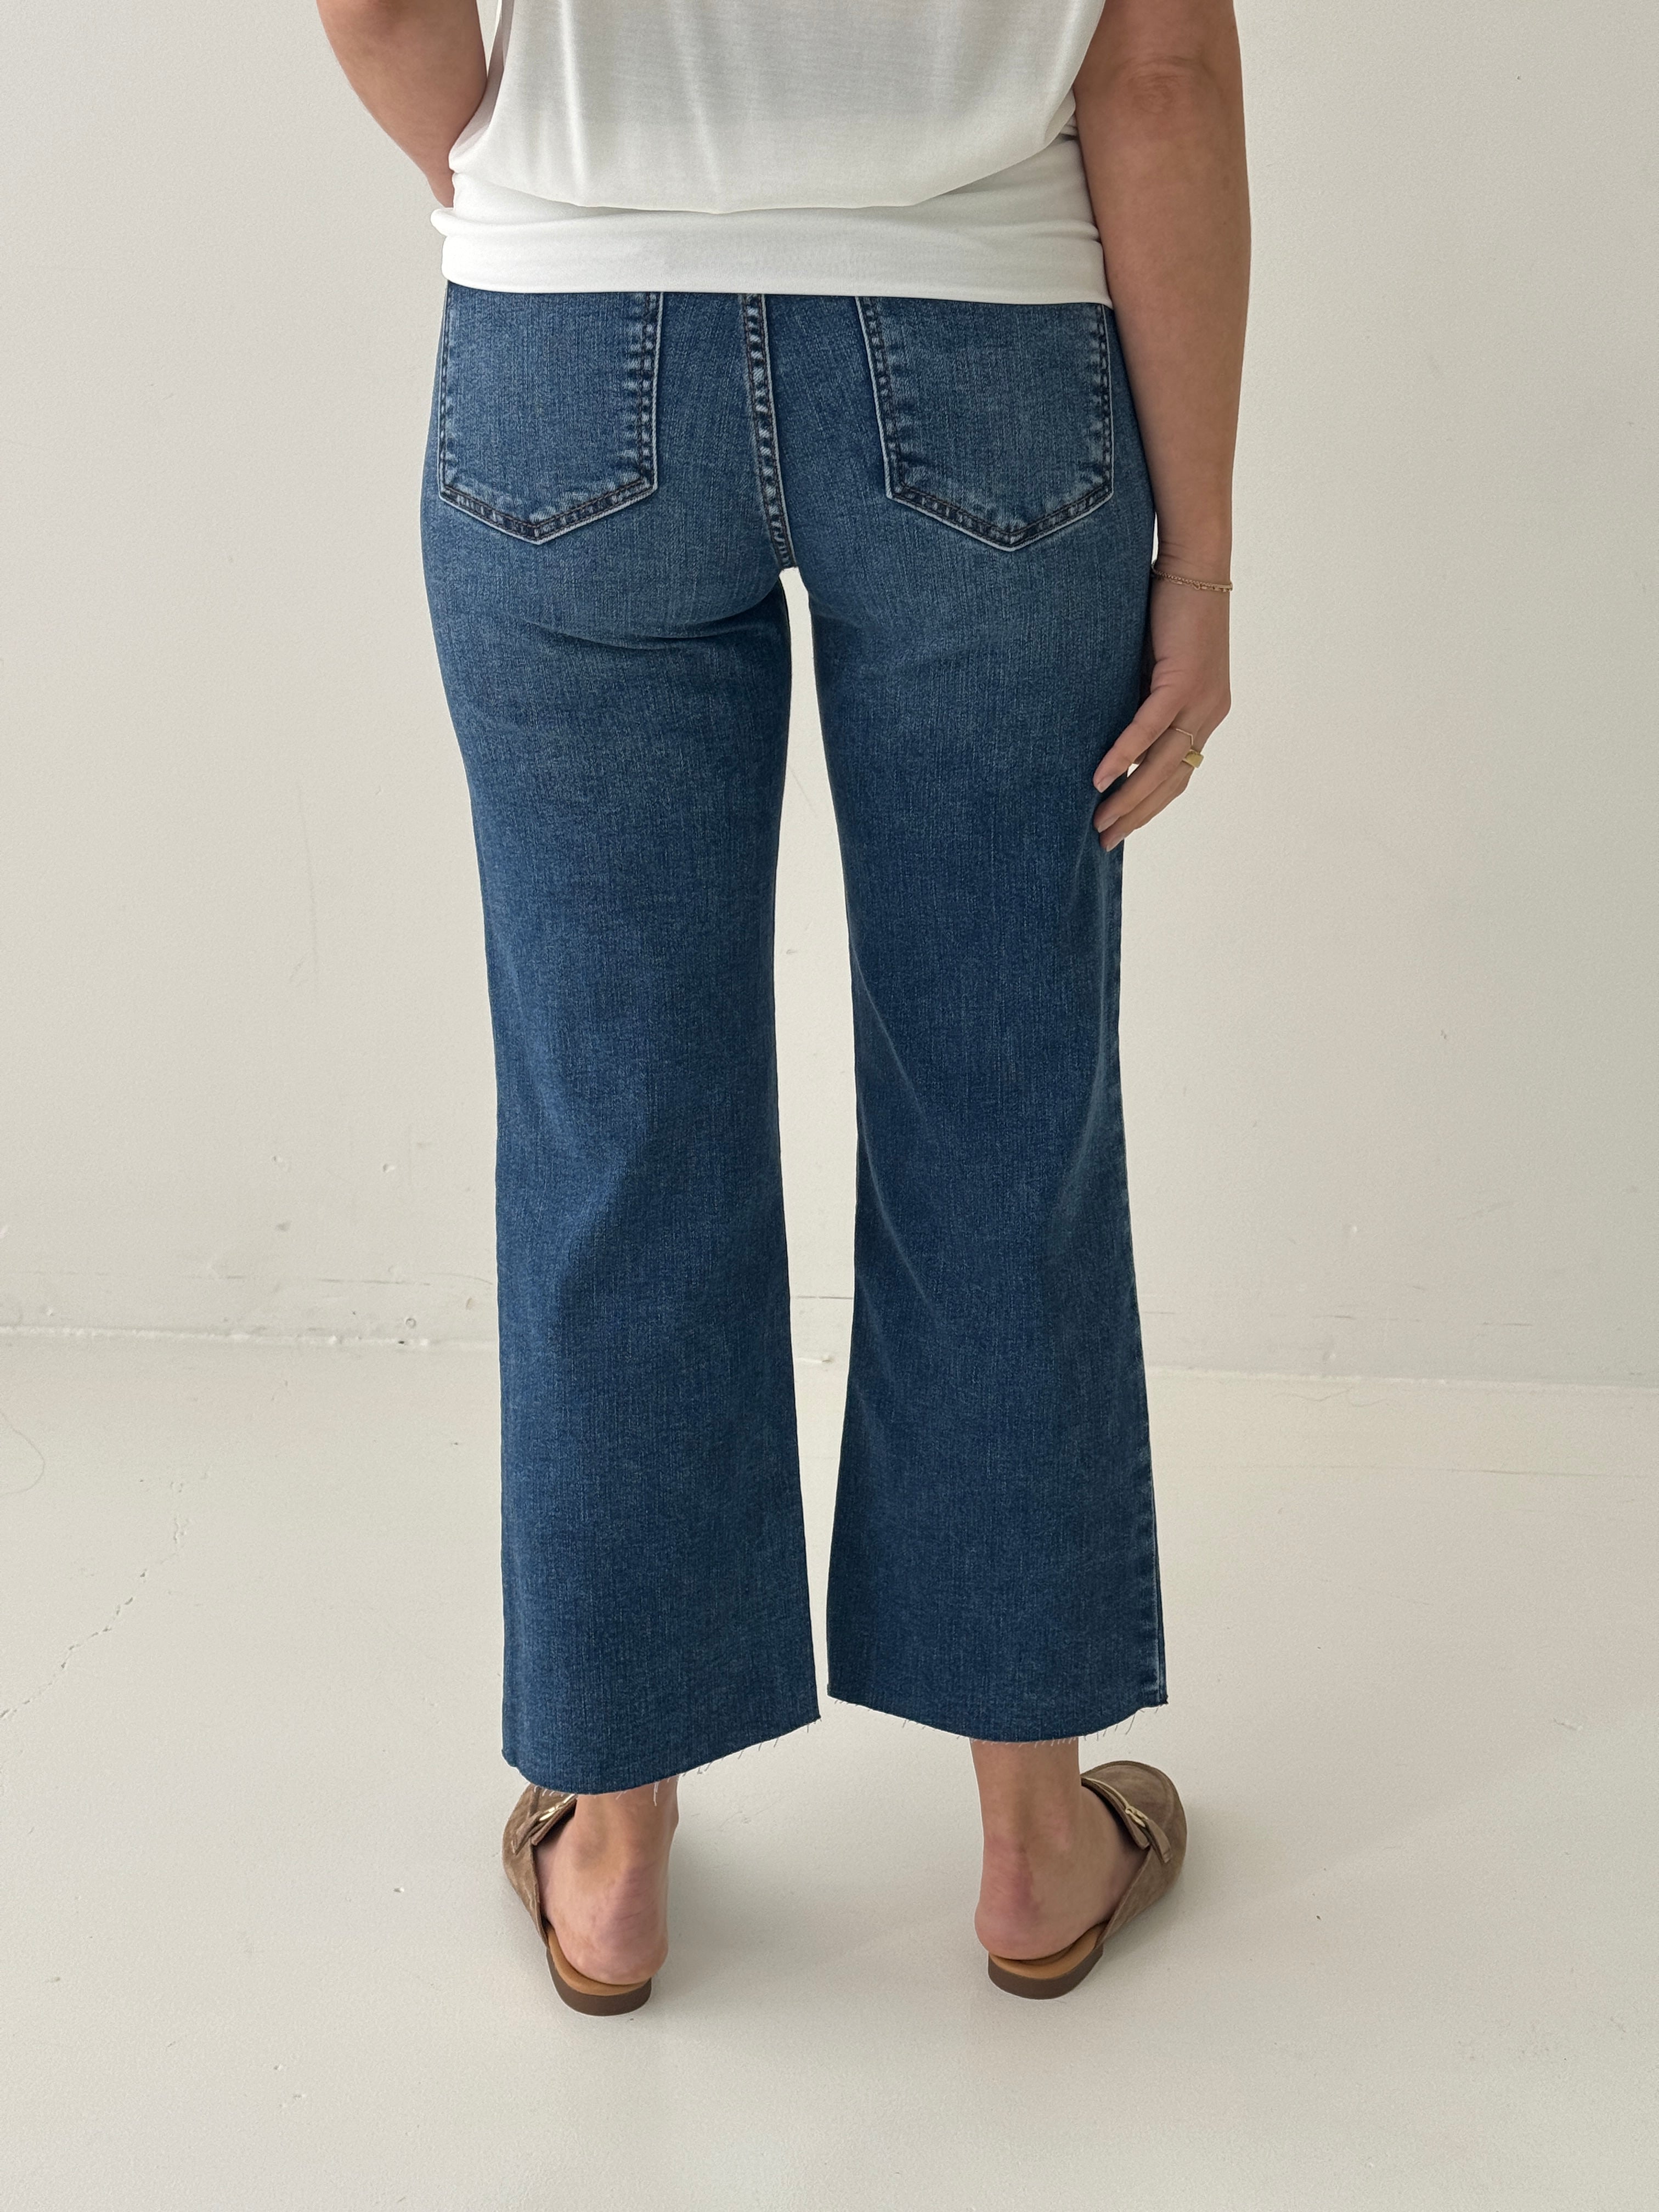 Kut Charlote High Rise Coulottes in Commenatory Wash-210 Denim-Little Bird Boutique